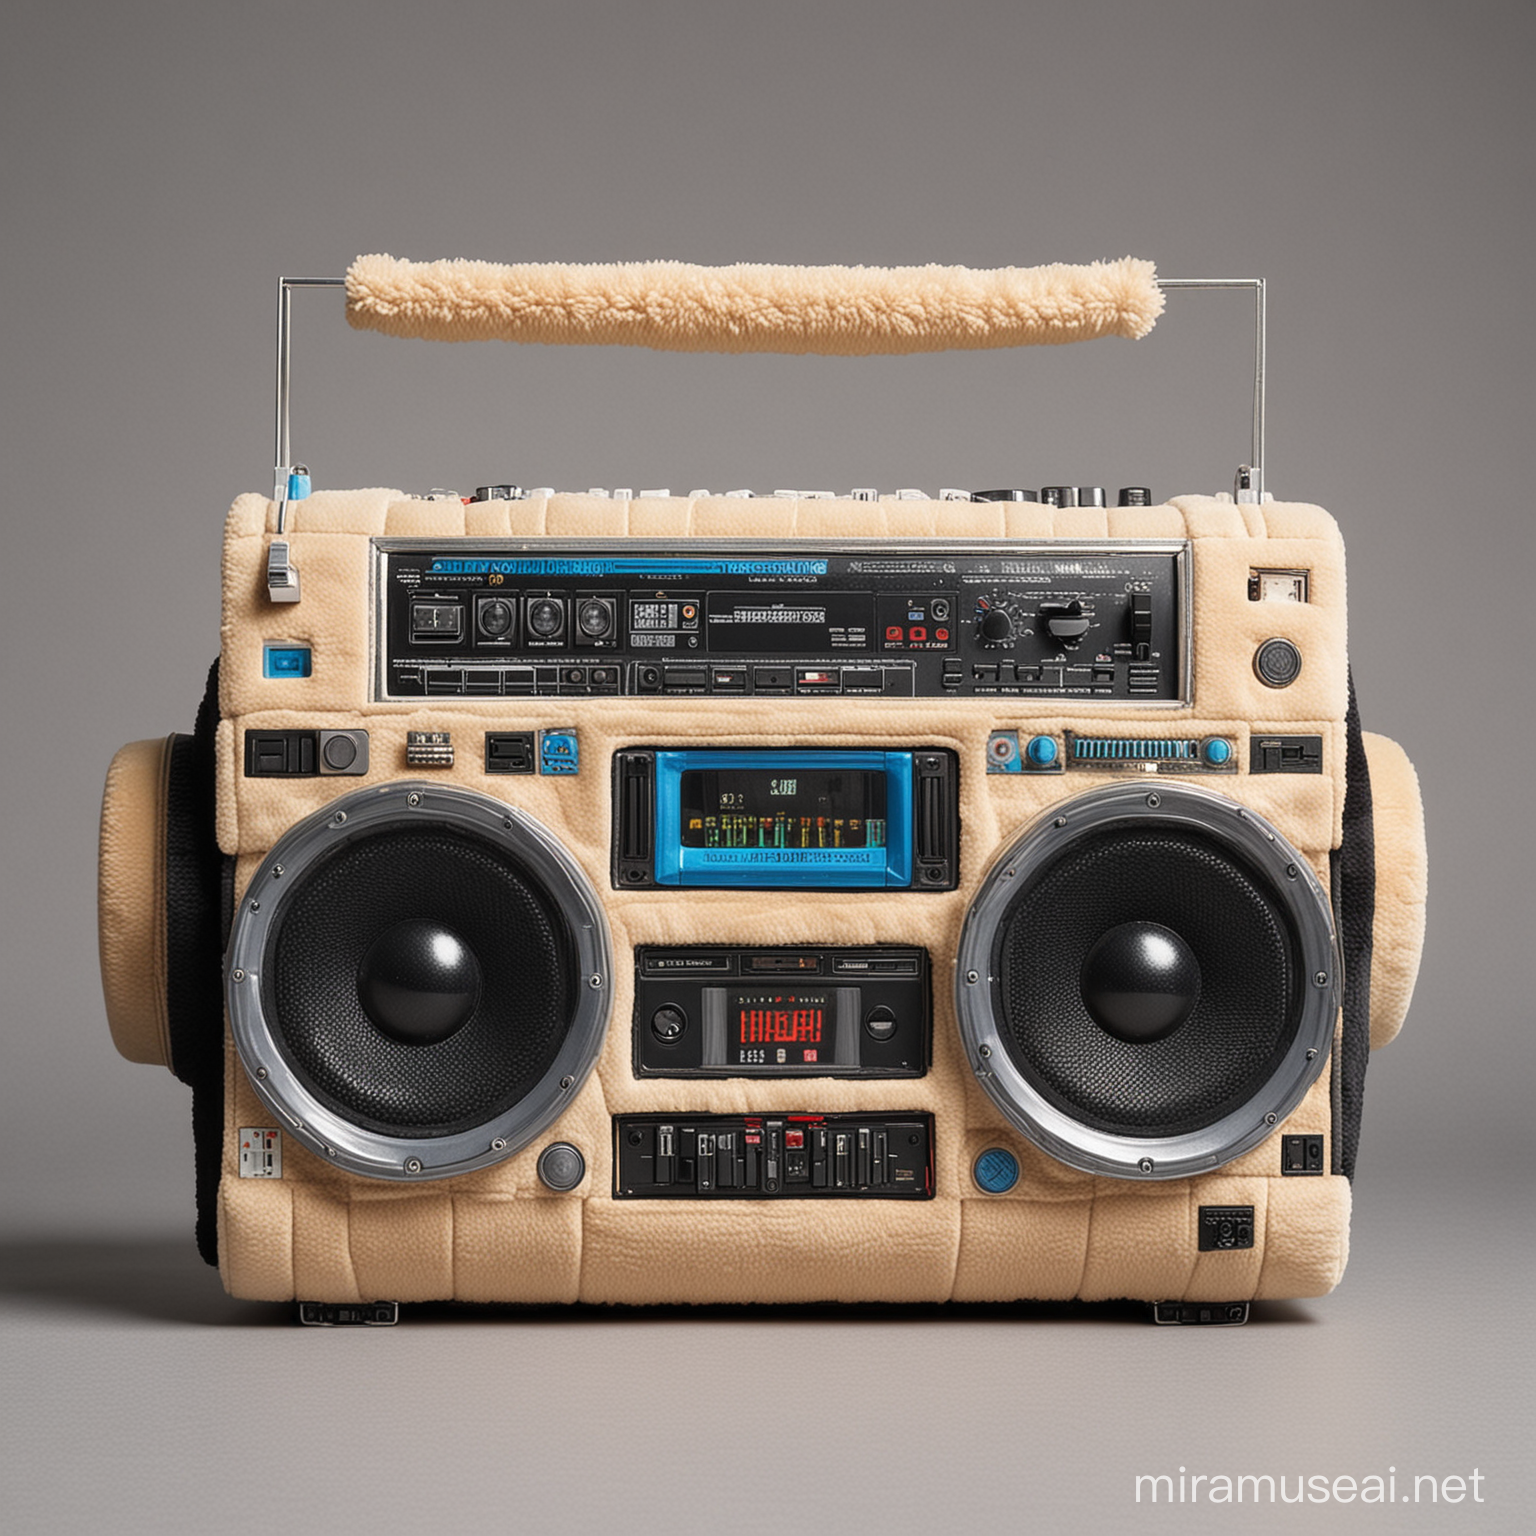 A plush toy of a boombox